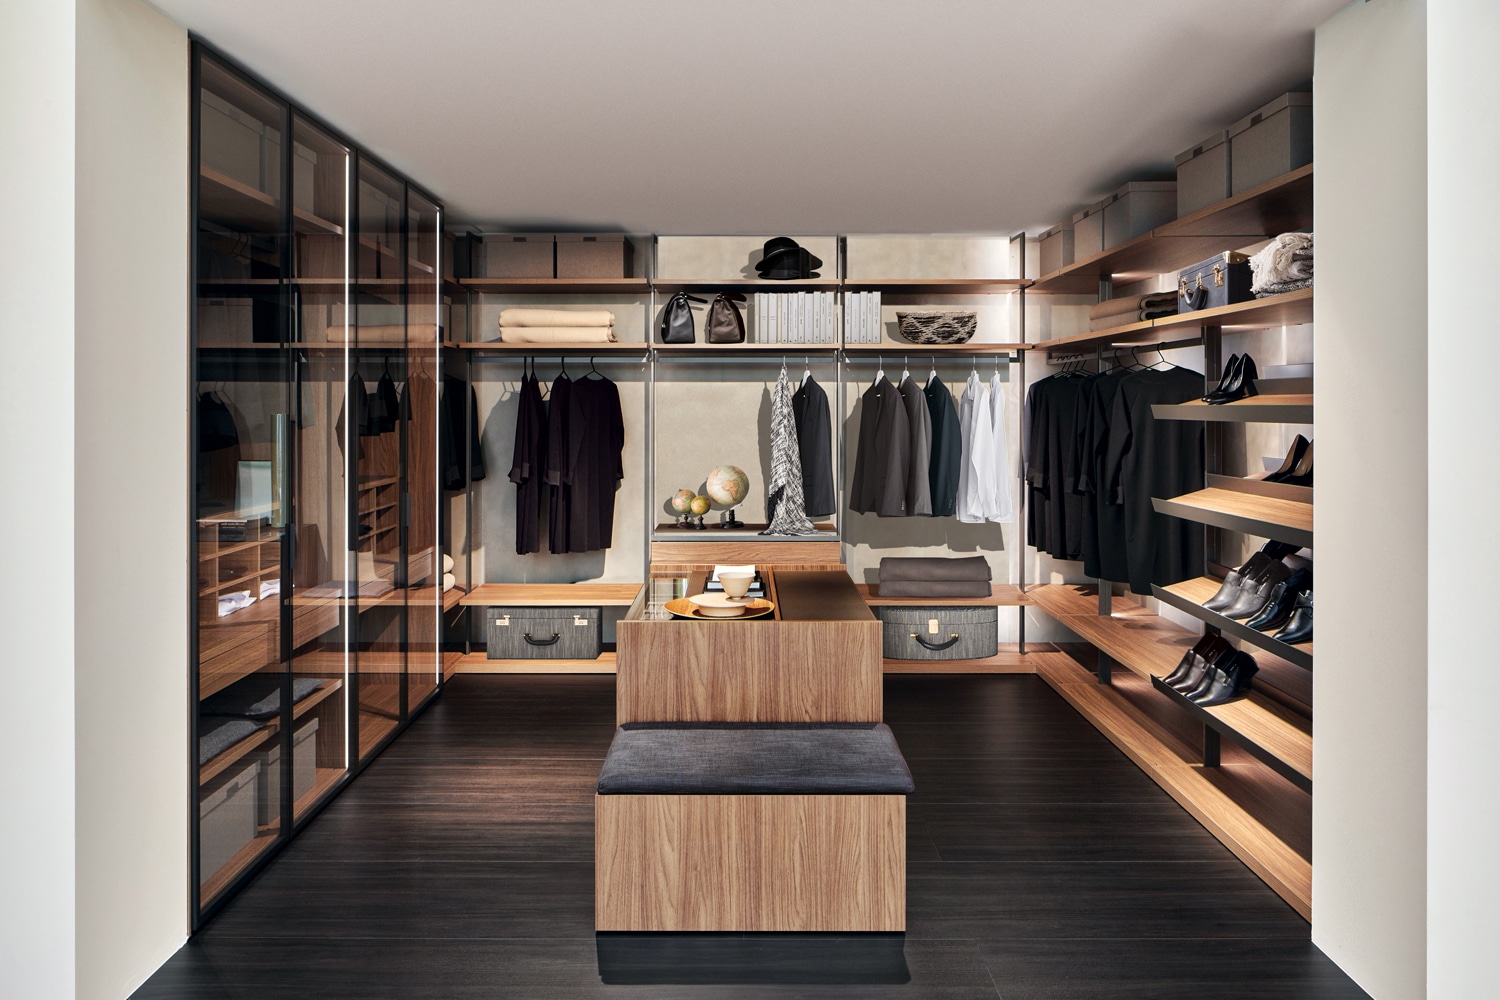 Walk-in closet in Easy Walnut, Ferro Oxid, and Ombra matte lacquer. Island at the center. Closed modules on the left with doors in framed fume' glass.